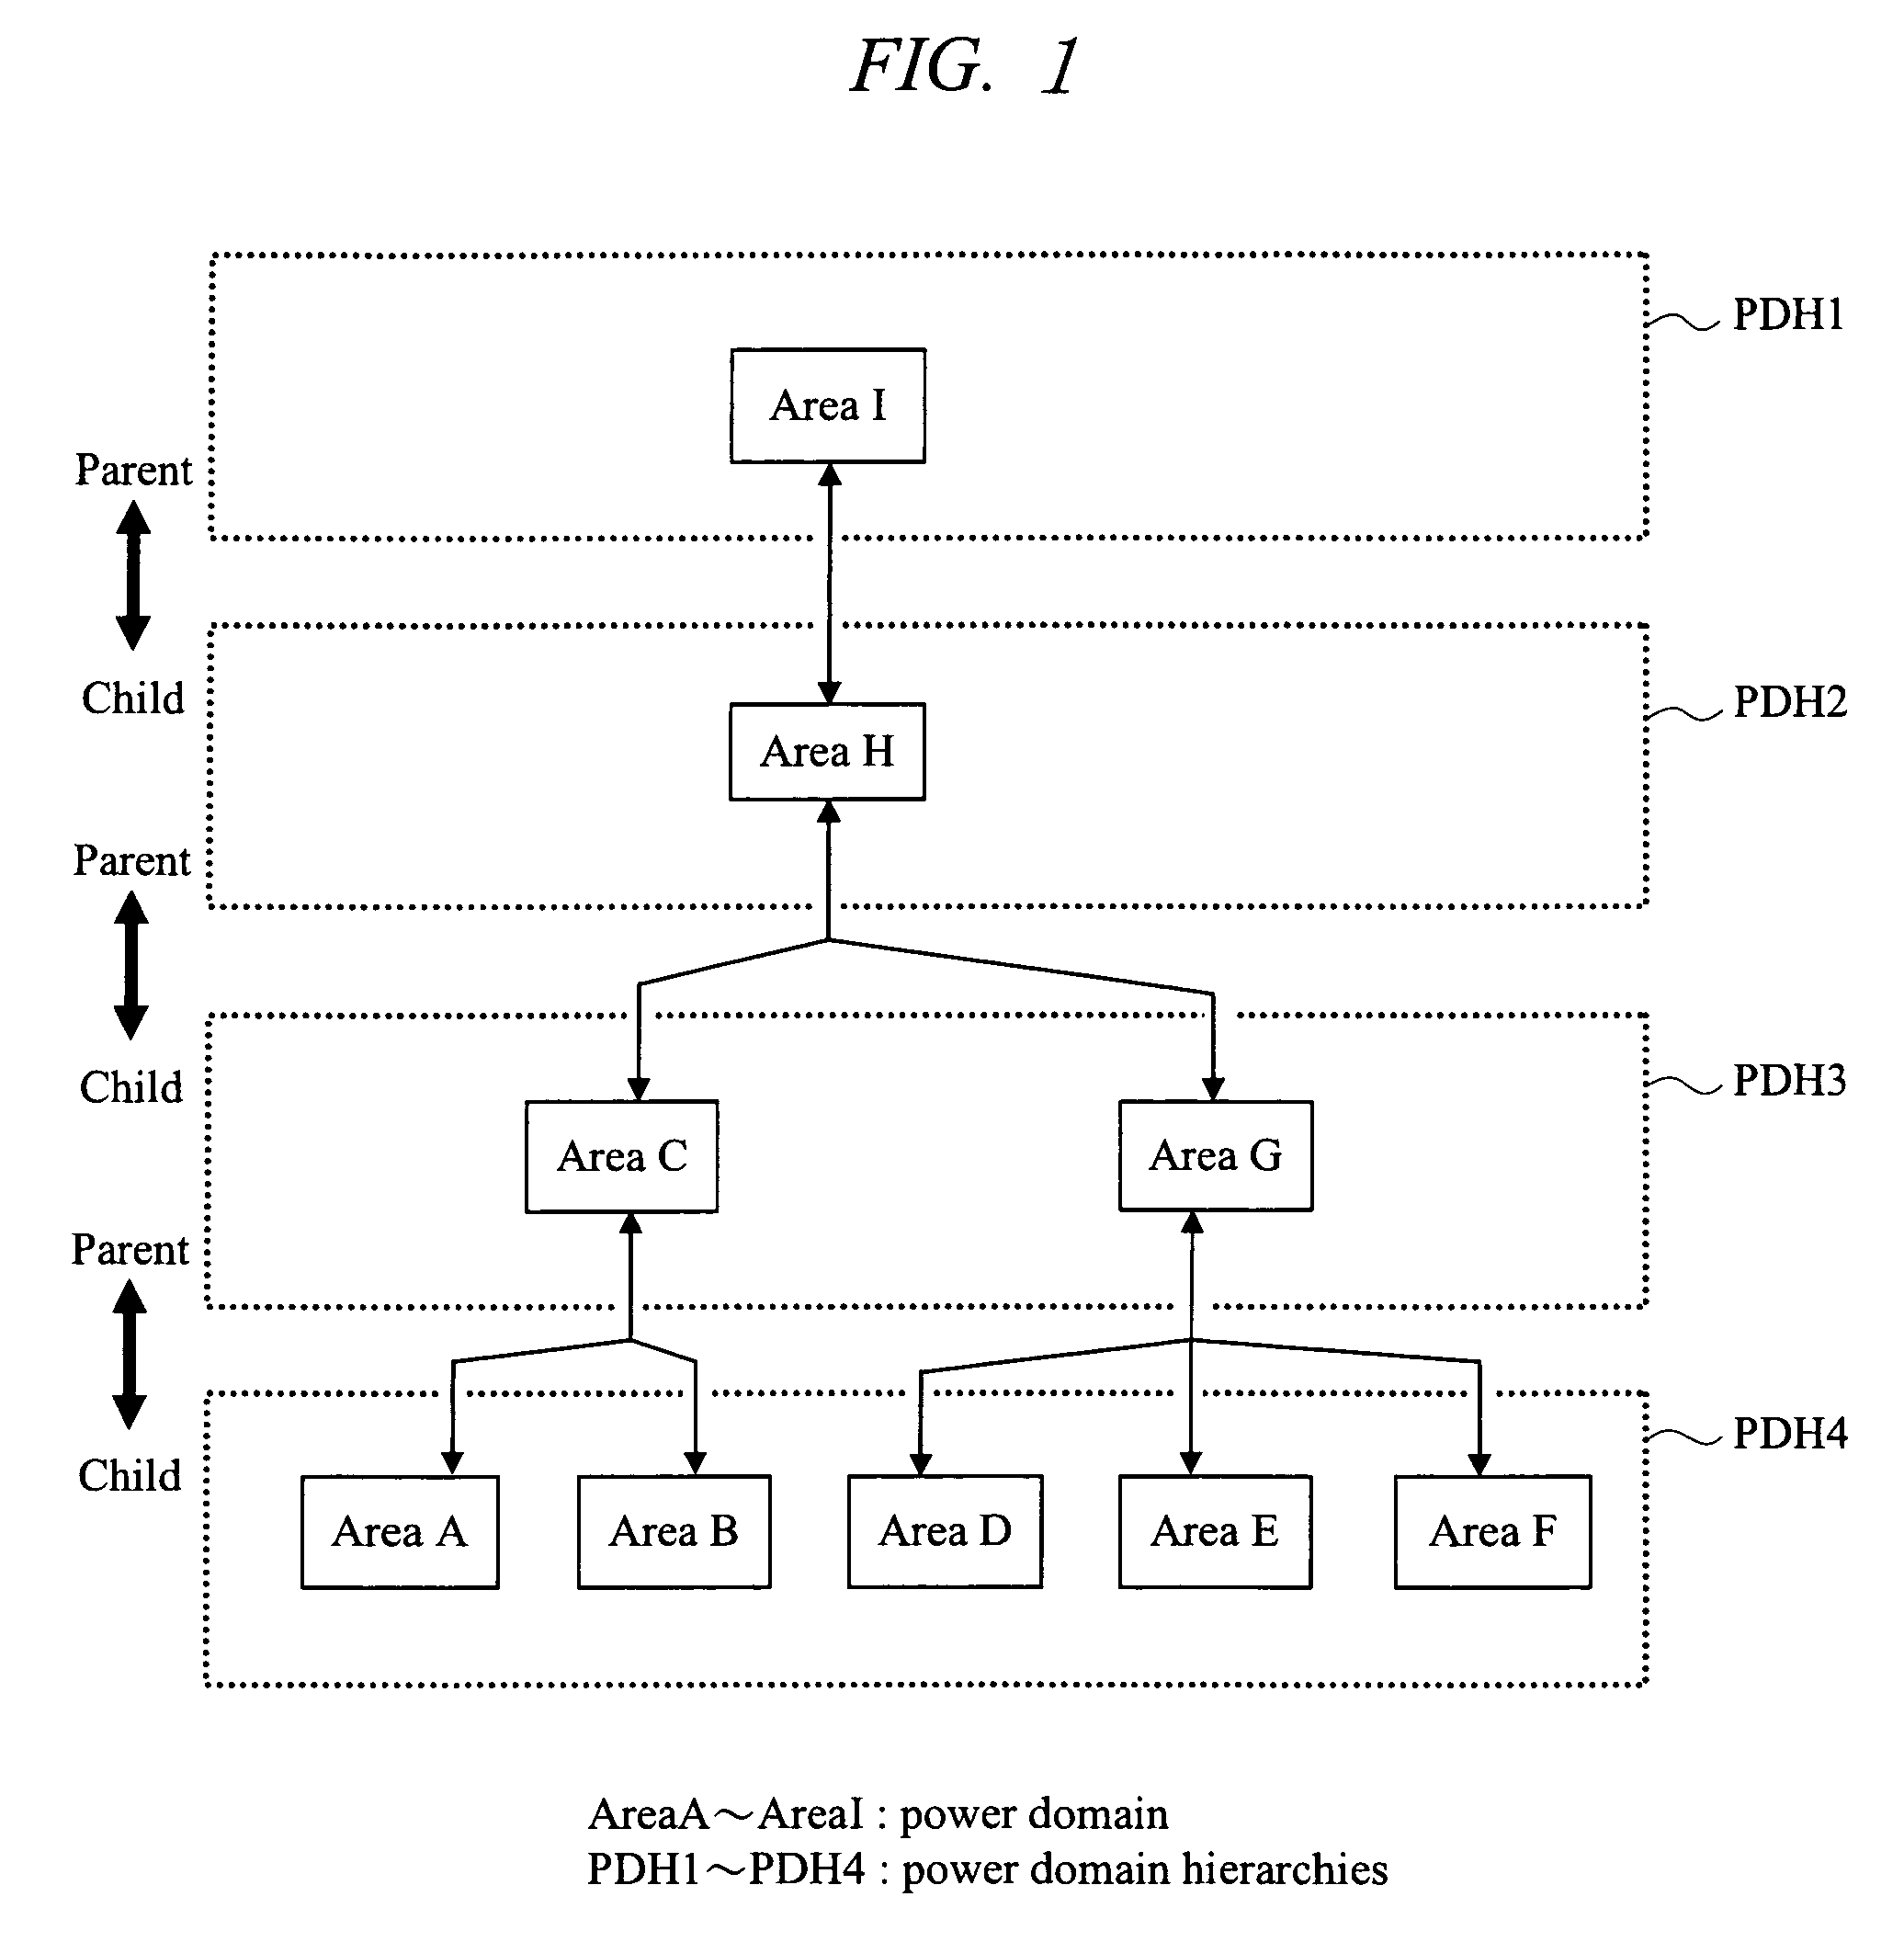 Semiconductor integrated circuit device with independent power domains